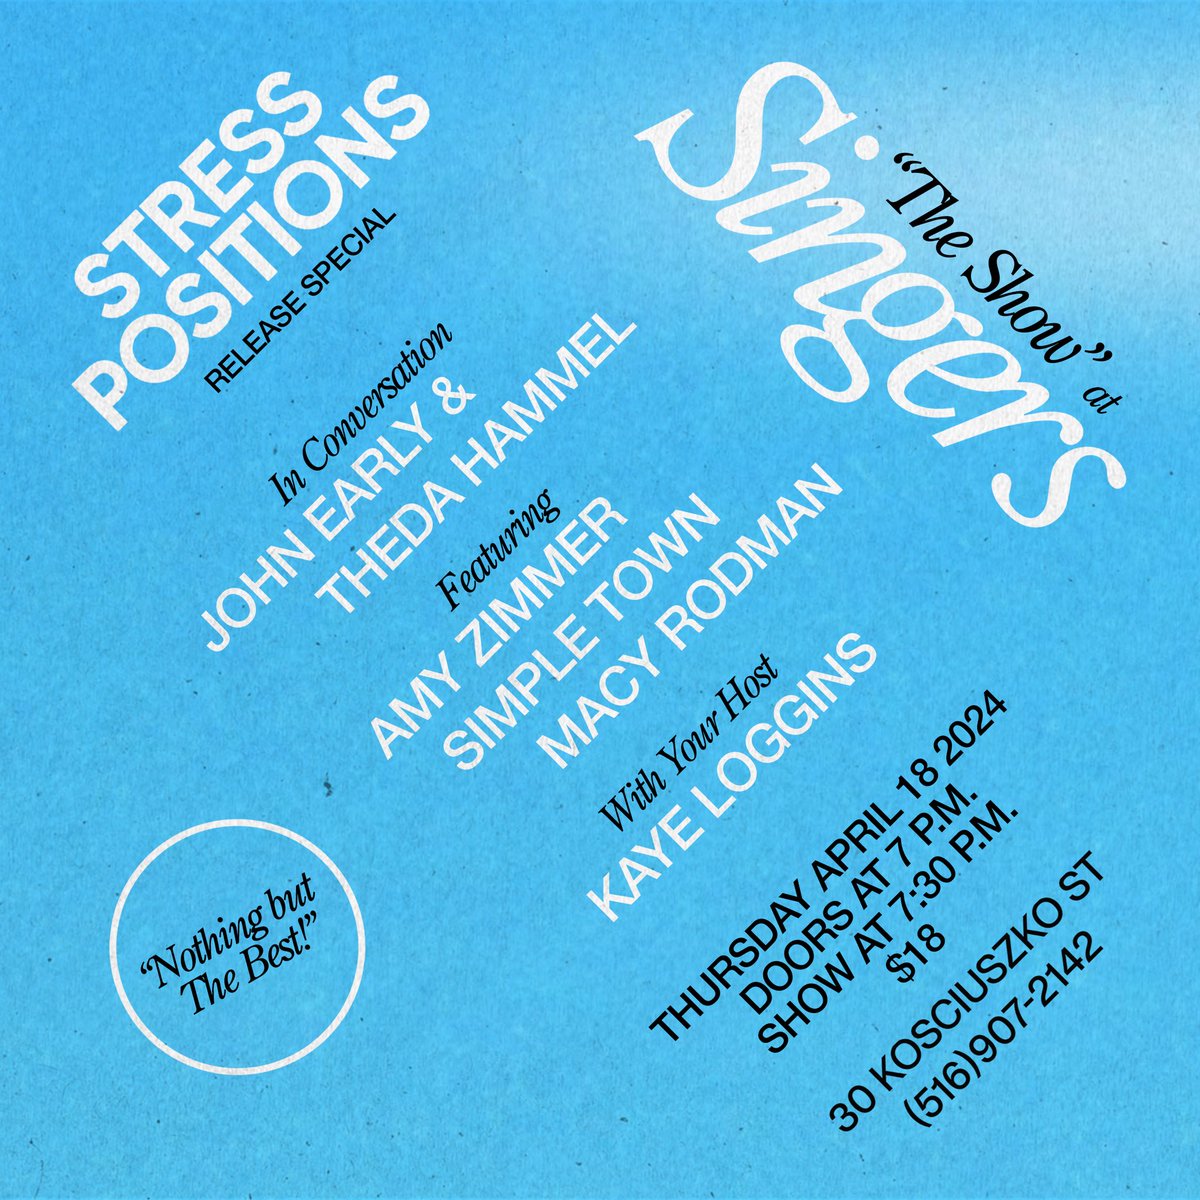 Wow! “The Show” at Singers presents STRESS POSITIONS Release Special with: @bejohnce @majortransceleb @oneamyzimmer @Simple__Town @MacyRodman & your host Next Thursday April 18 Wow!